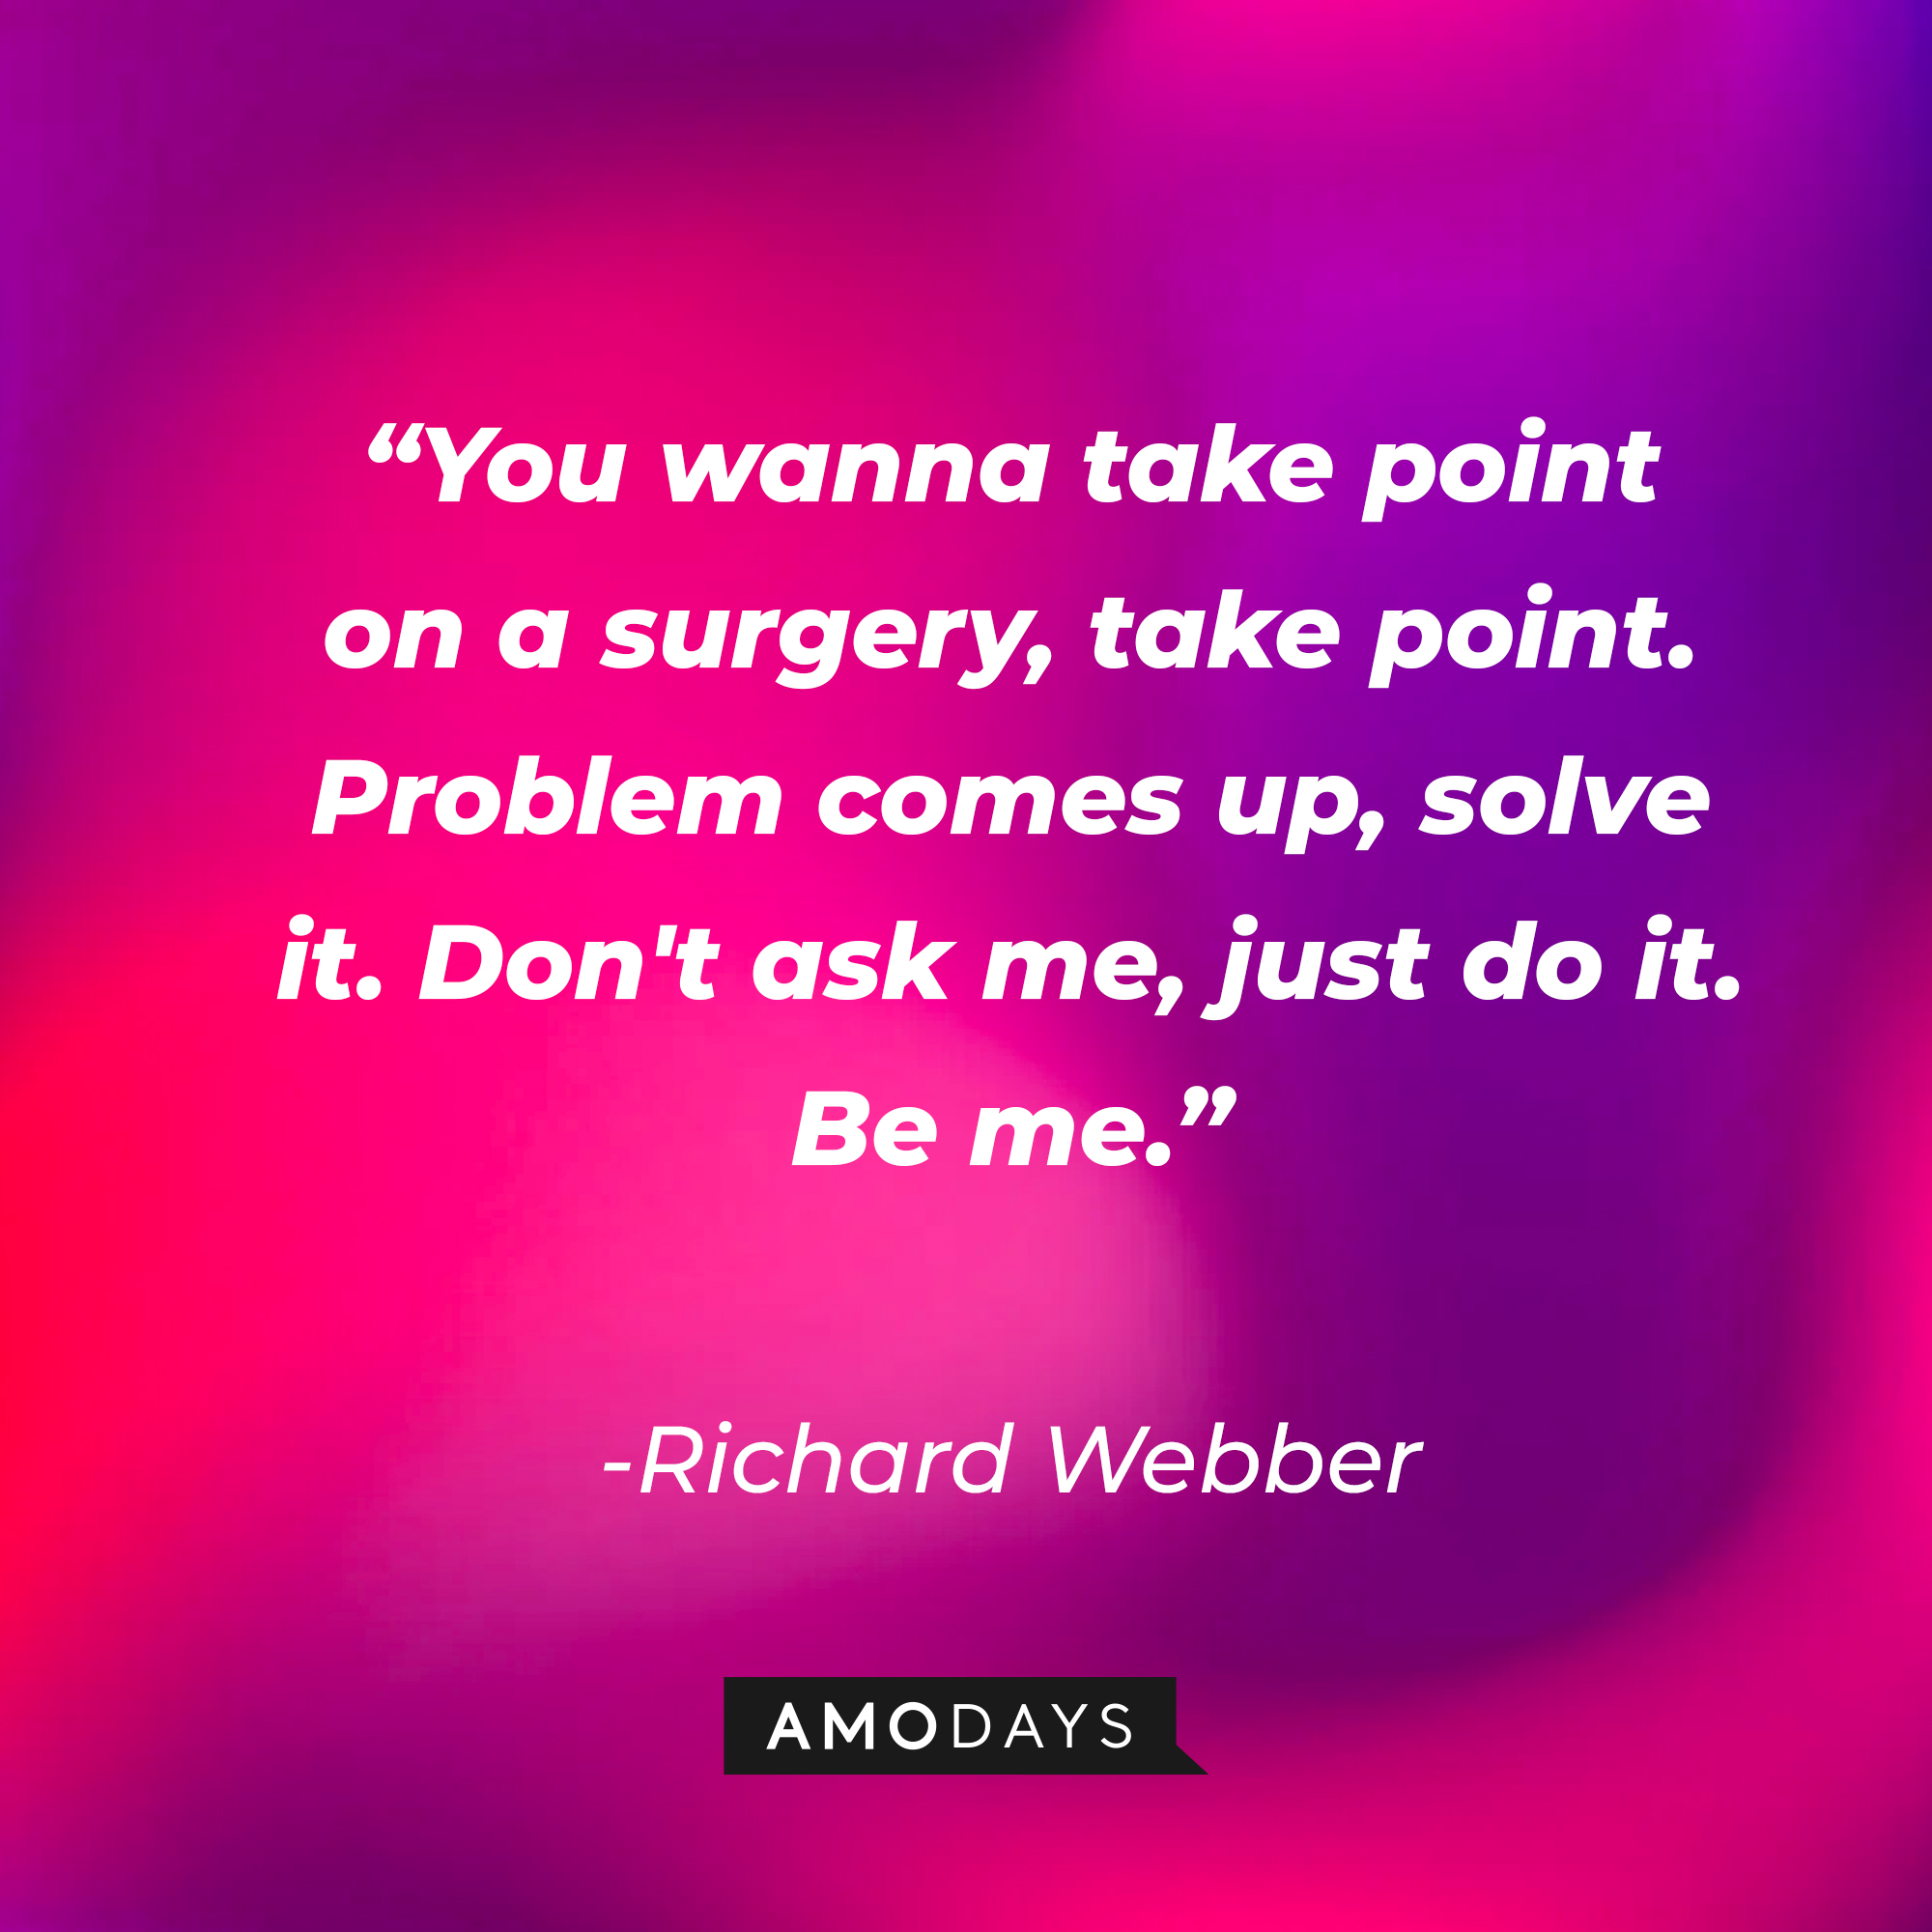 Richard Webber with his quote: "You wanna take point on a surgery, take point. Problem comes up, solve it. Don't ask me; just do it. Be me." | Source: Amodays